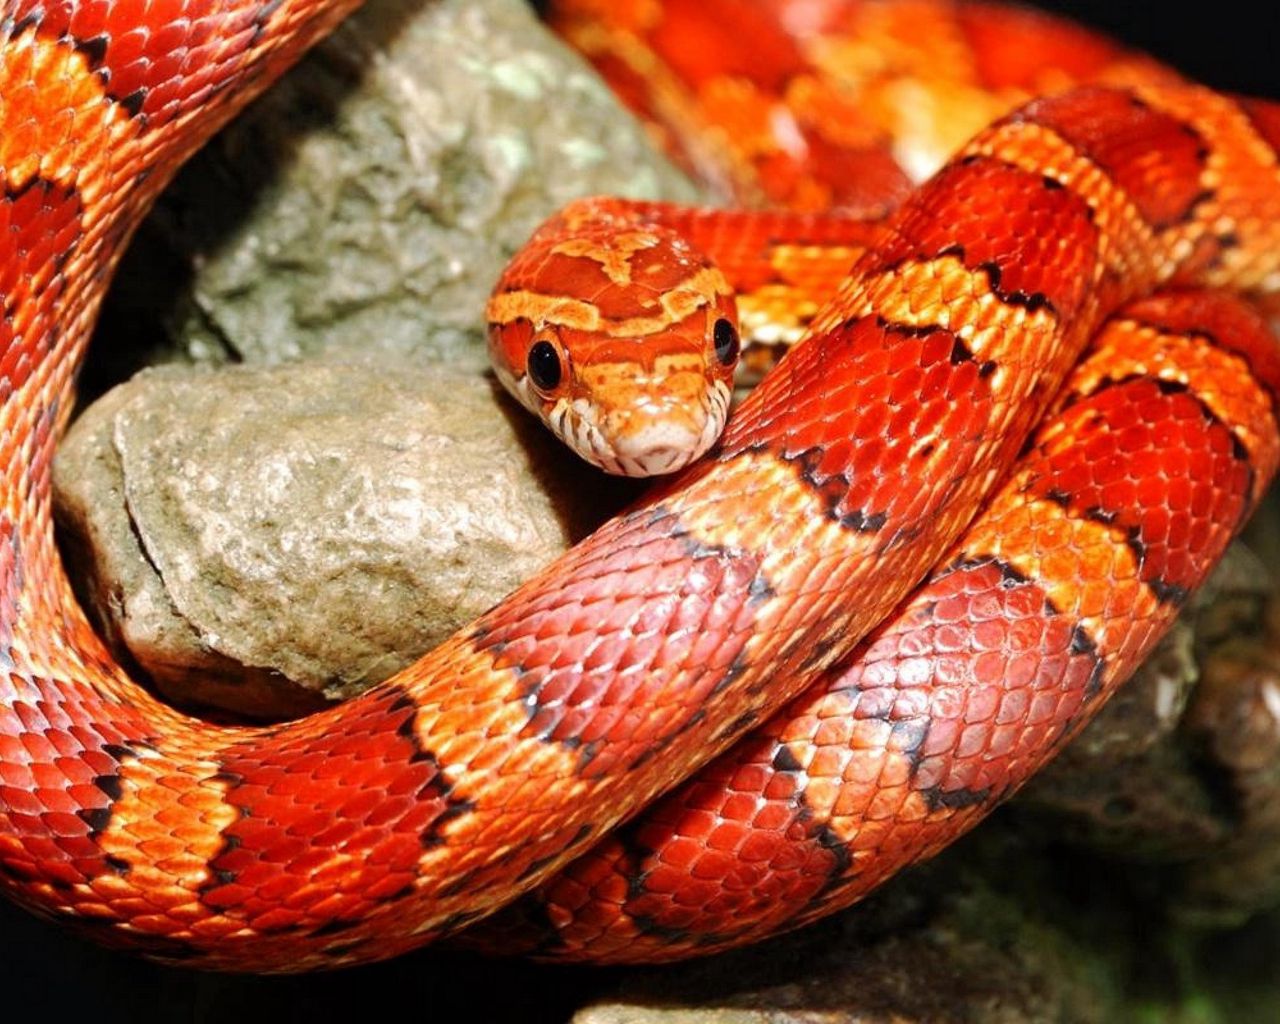 Download wallpaper 1280x1024 snake, color, reptile standard 5:4 HD background